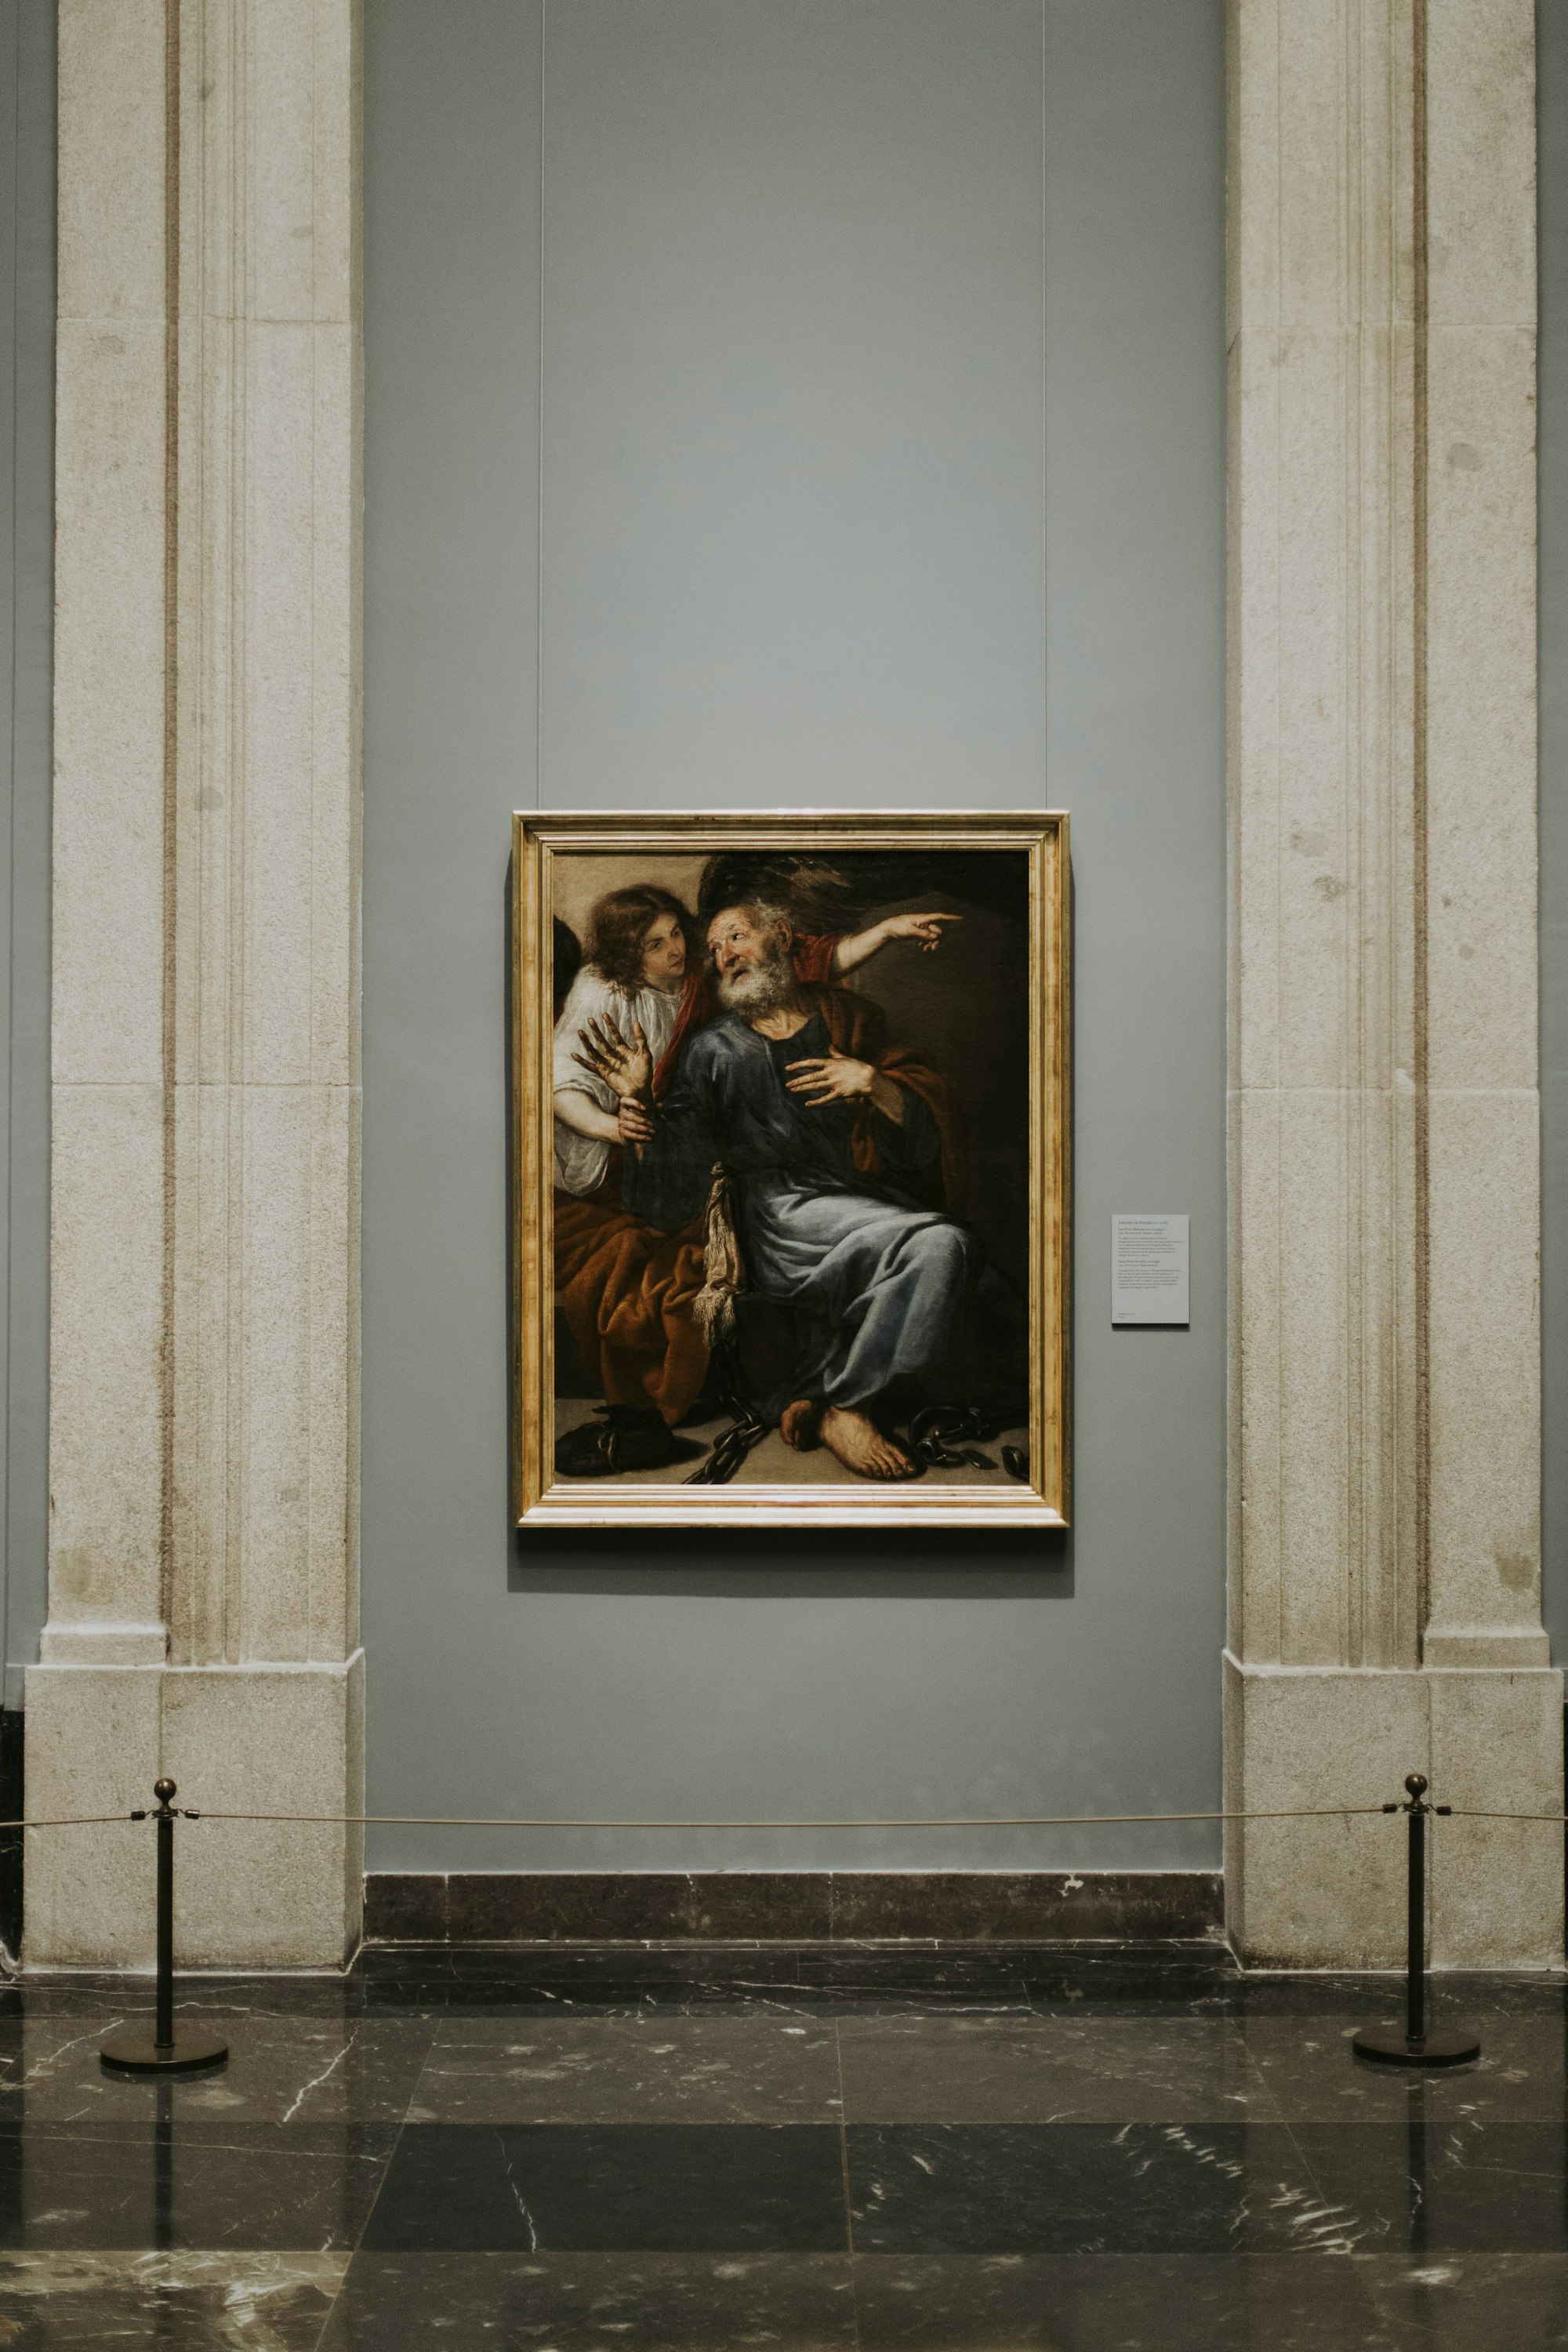 Painting inside a museum